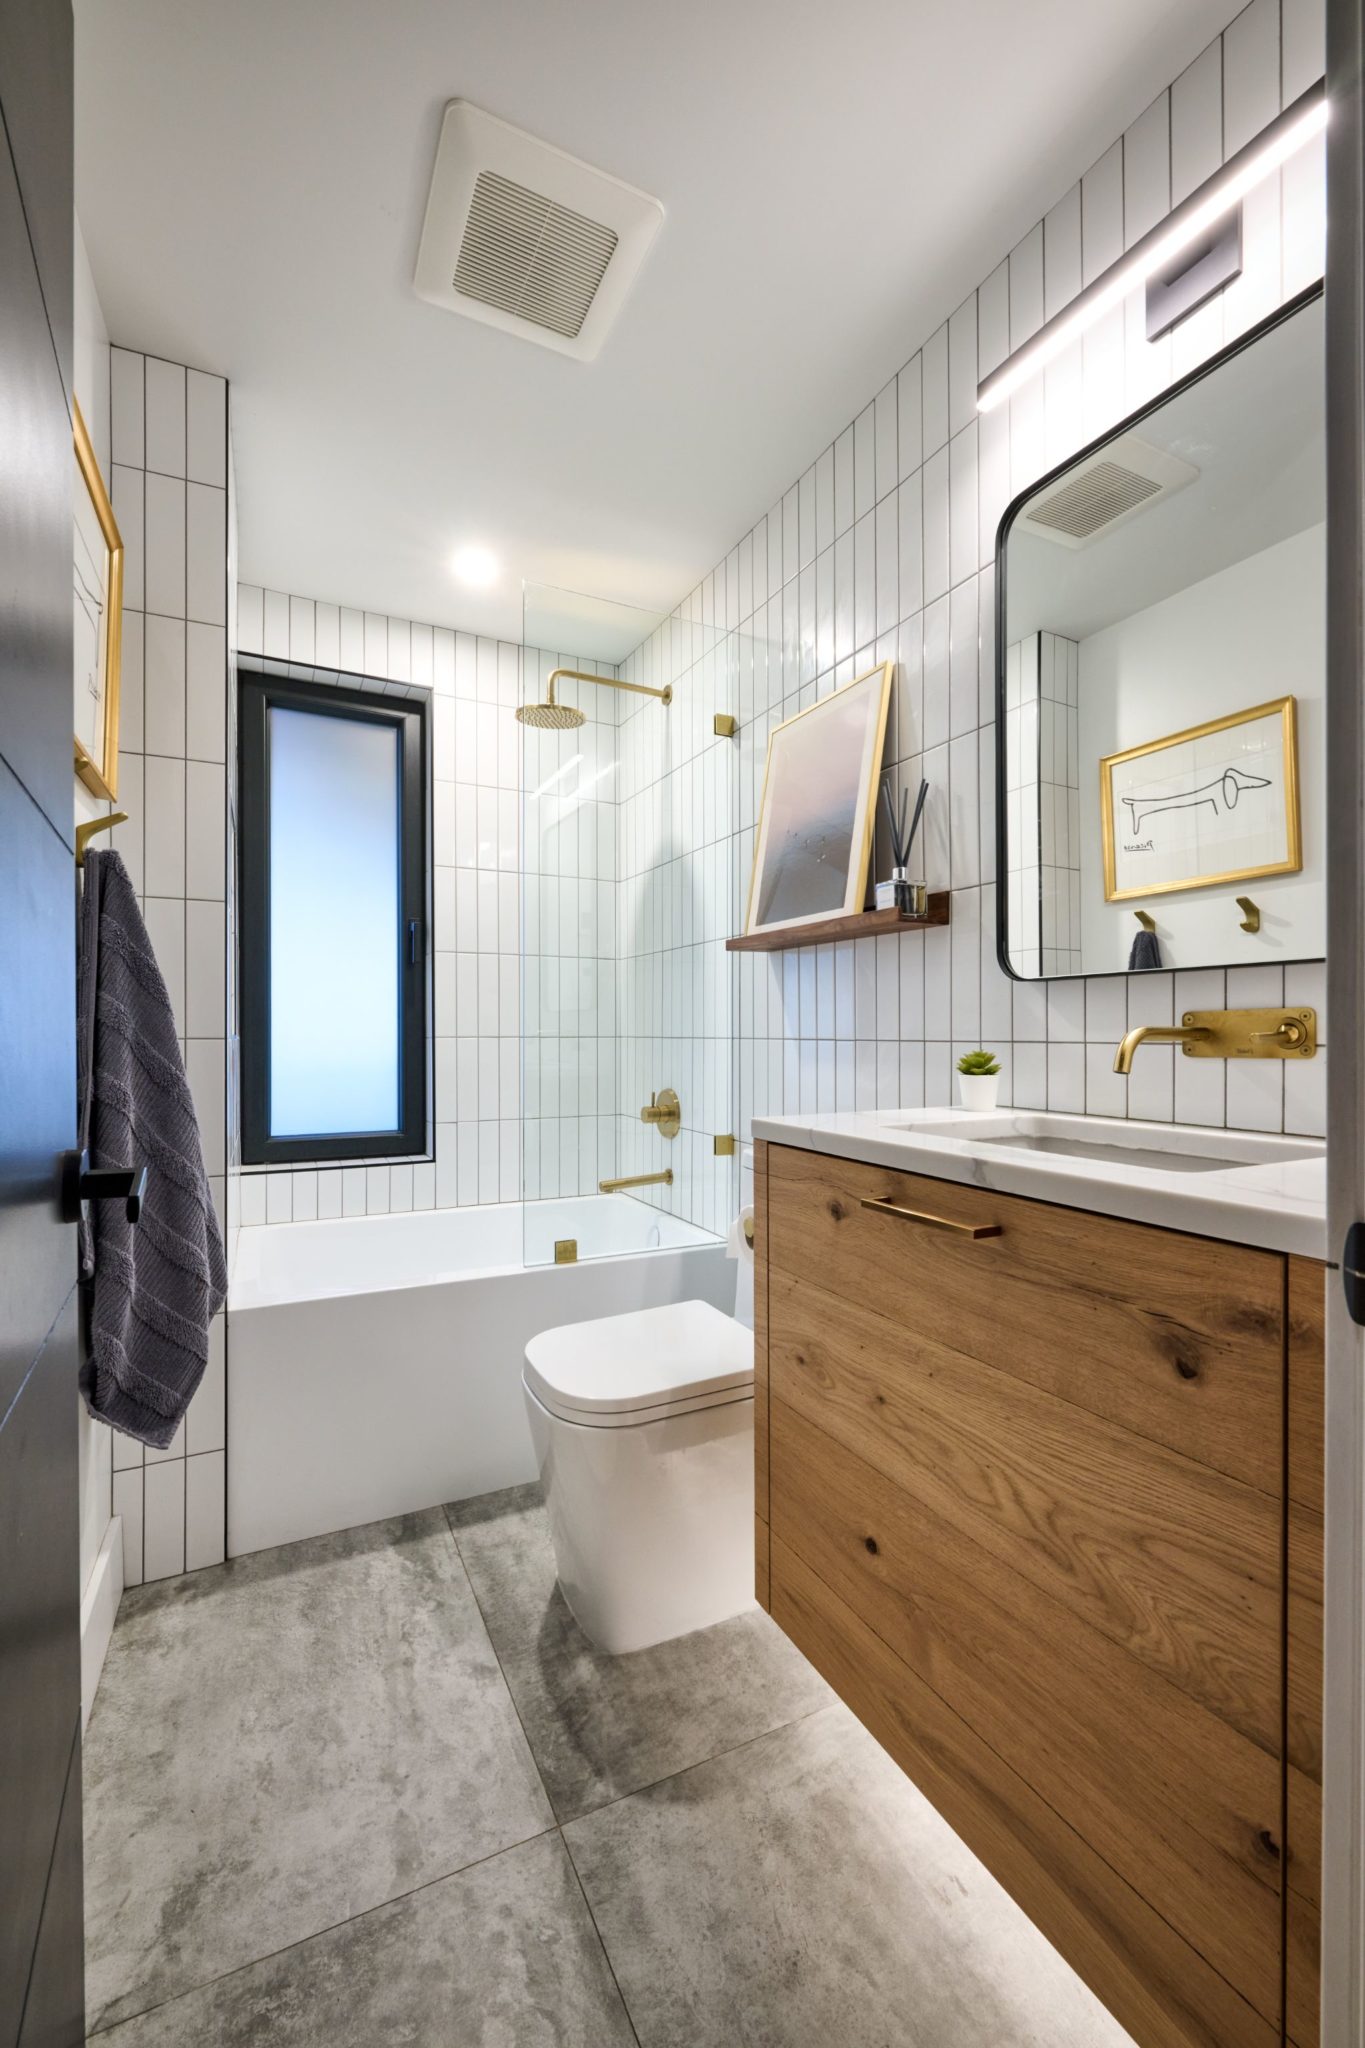 Bathroom renovation by Keely Smith